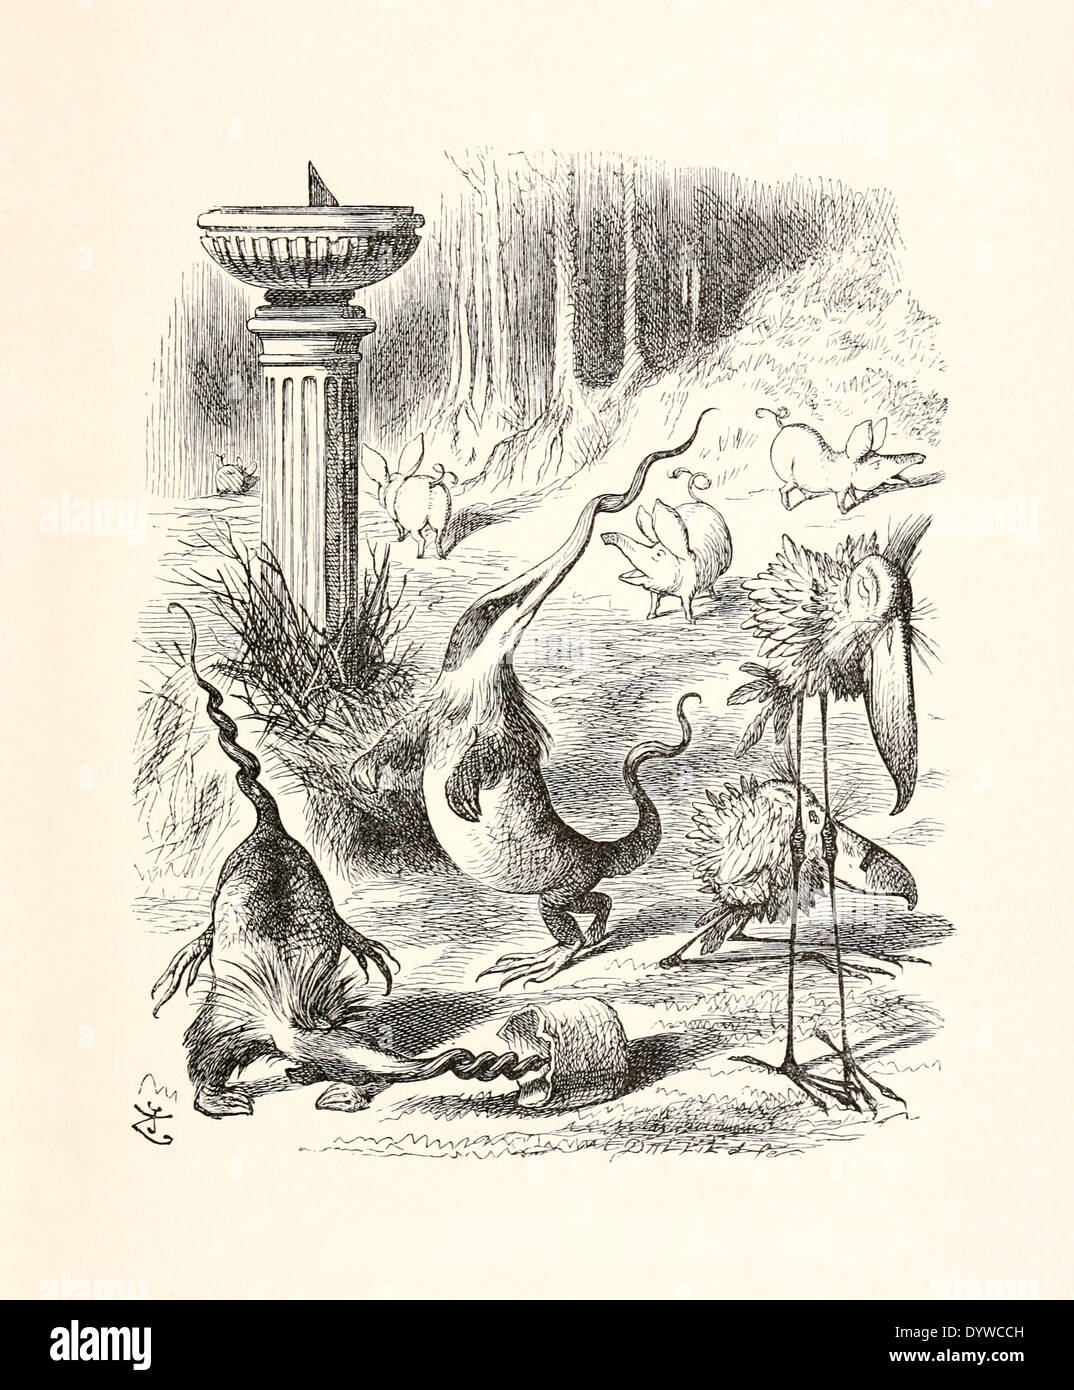 John Tenniel (1820-1914) illustration from Lewis Carroll's 'Through the Looking-Glass’ published in 1871.Jabberwocky explanation Stock Photo